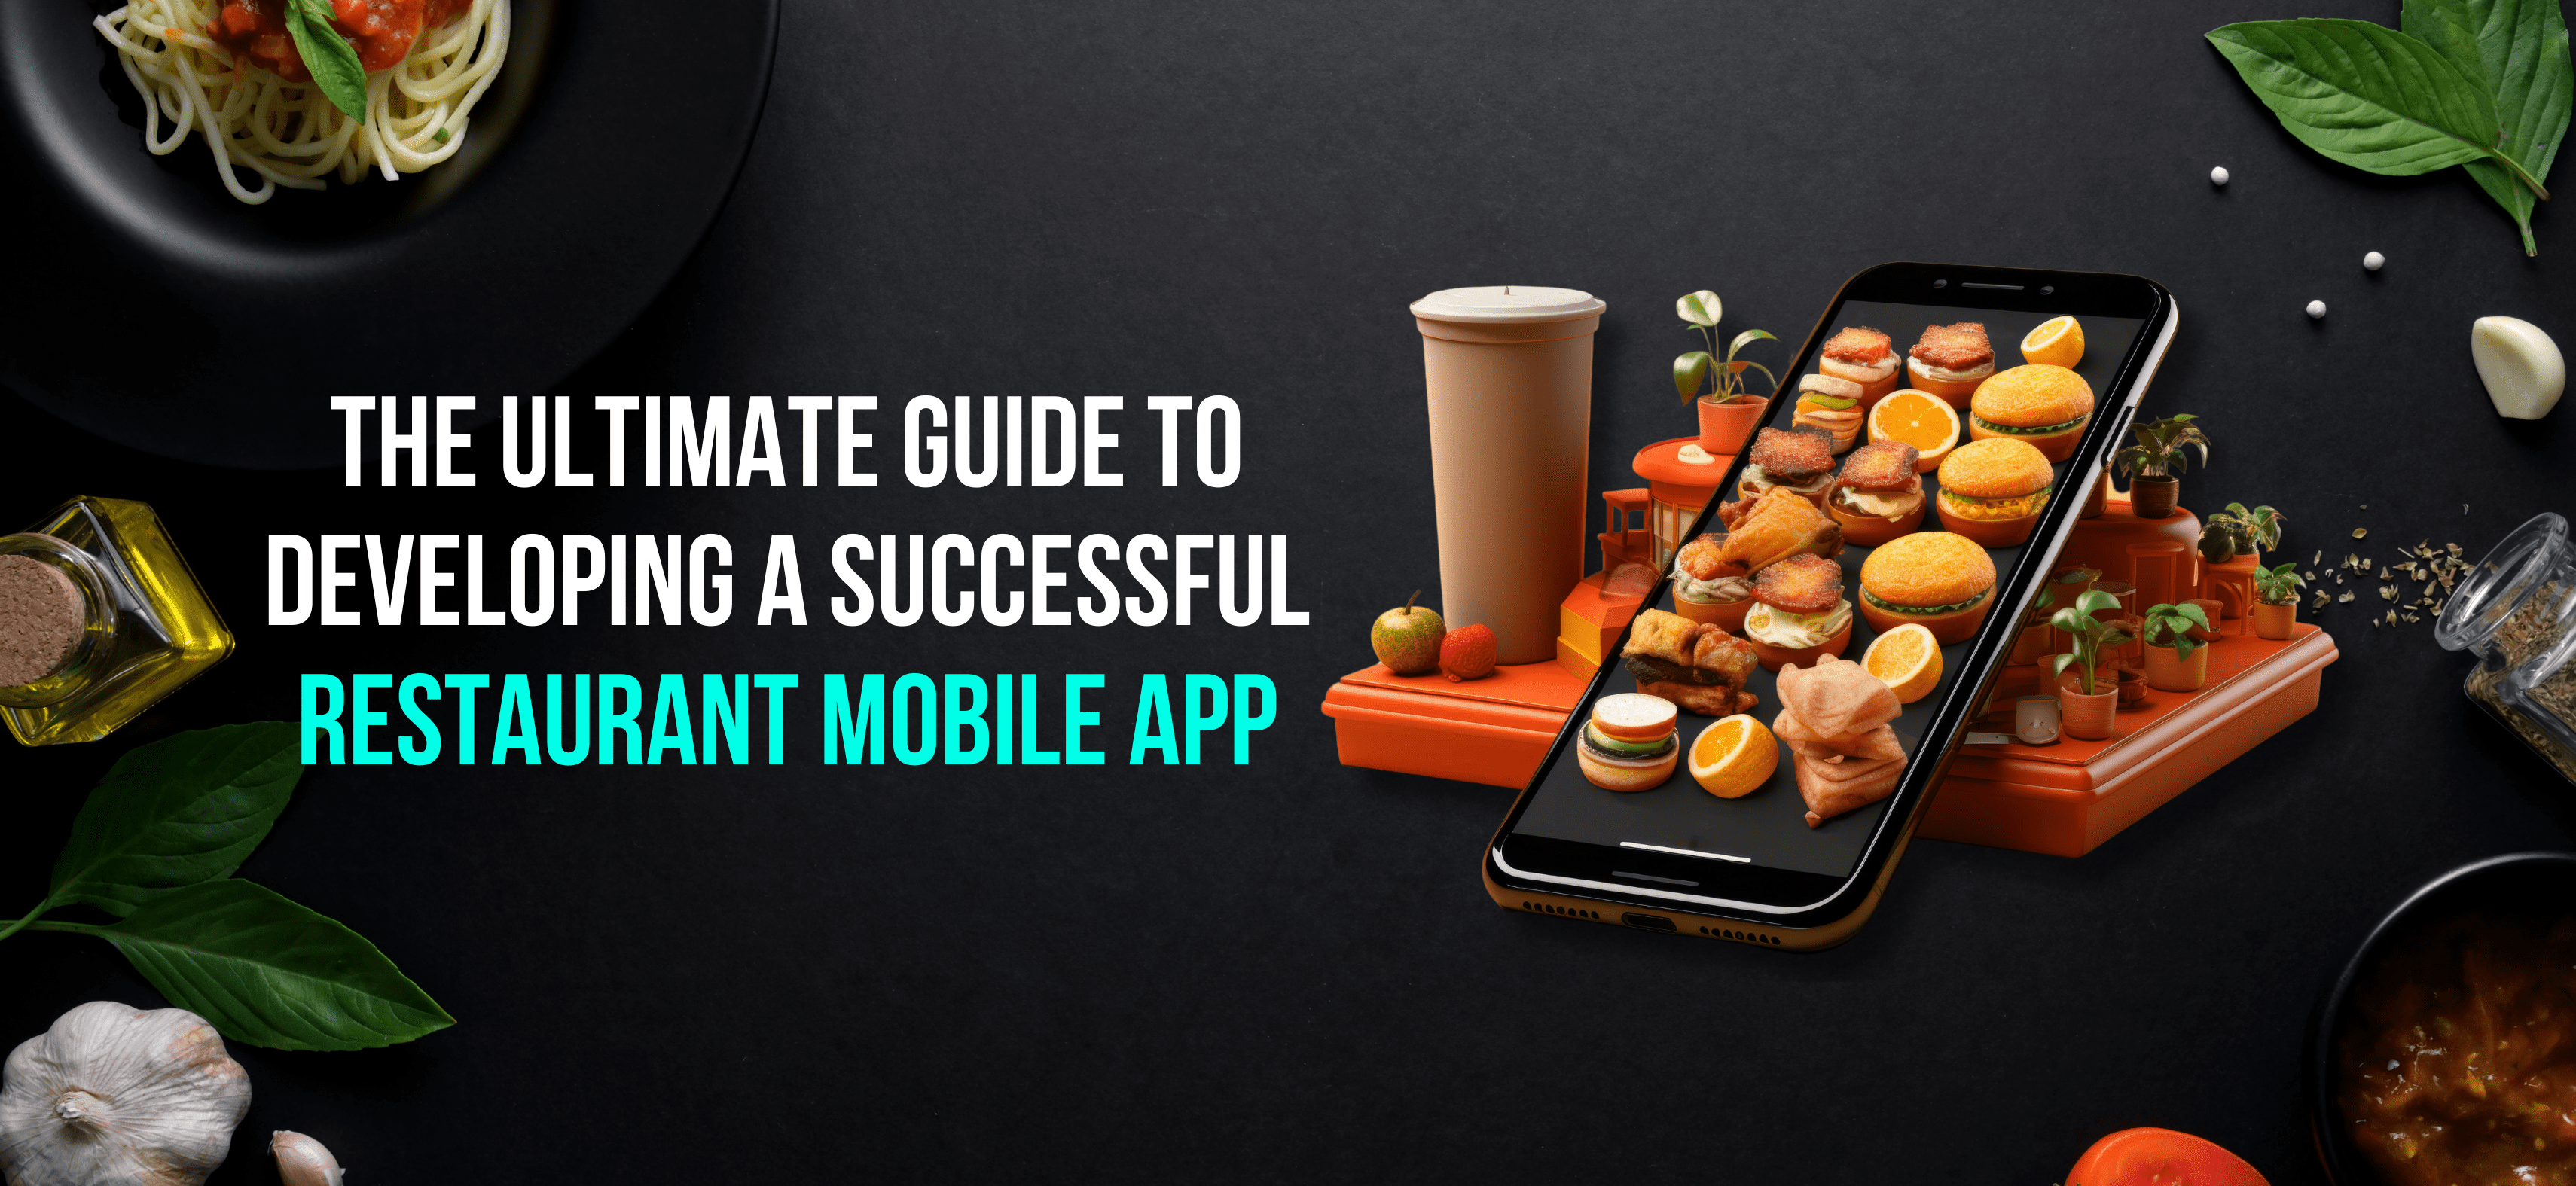 The Ultimate Guide to Developing a Successful Restaurant Mobile App - Internet Soft